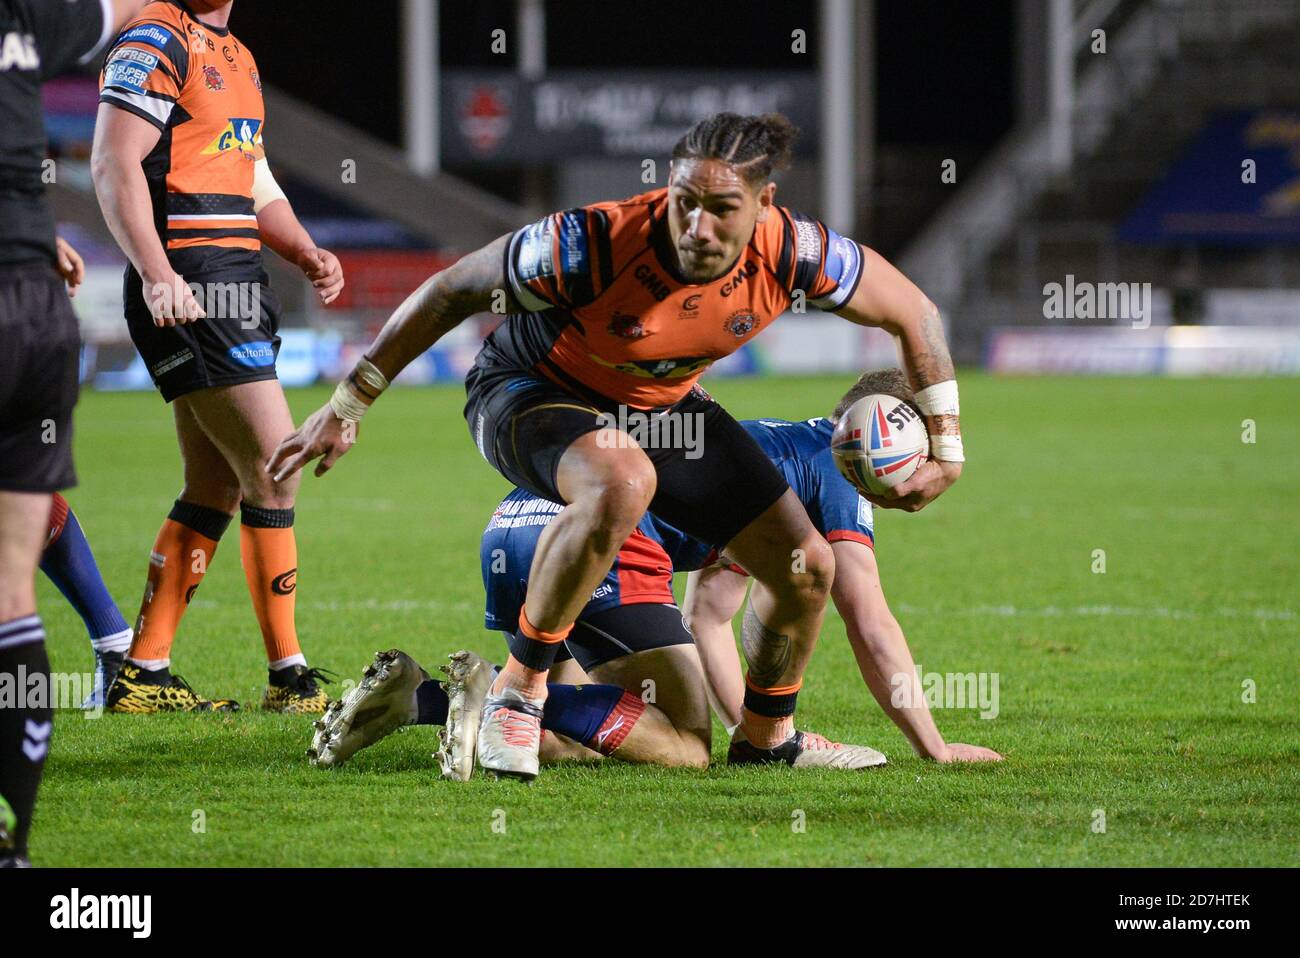 Castleford's Jesse Sene-Lefao picks up a loose ball and goes for the line before the referee blows for a knock on  during the Betfred Super League mat Stock Photo